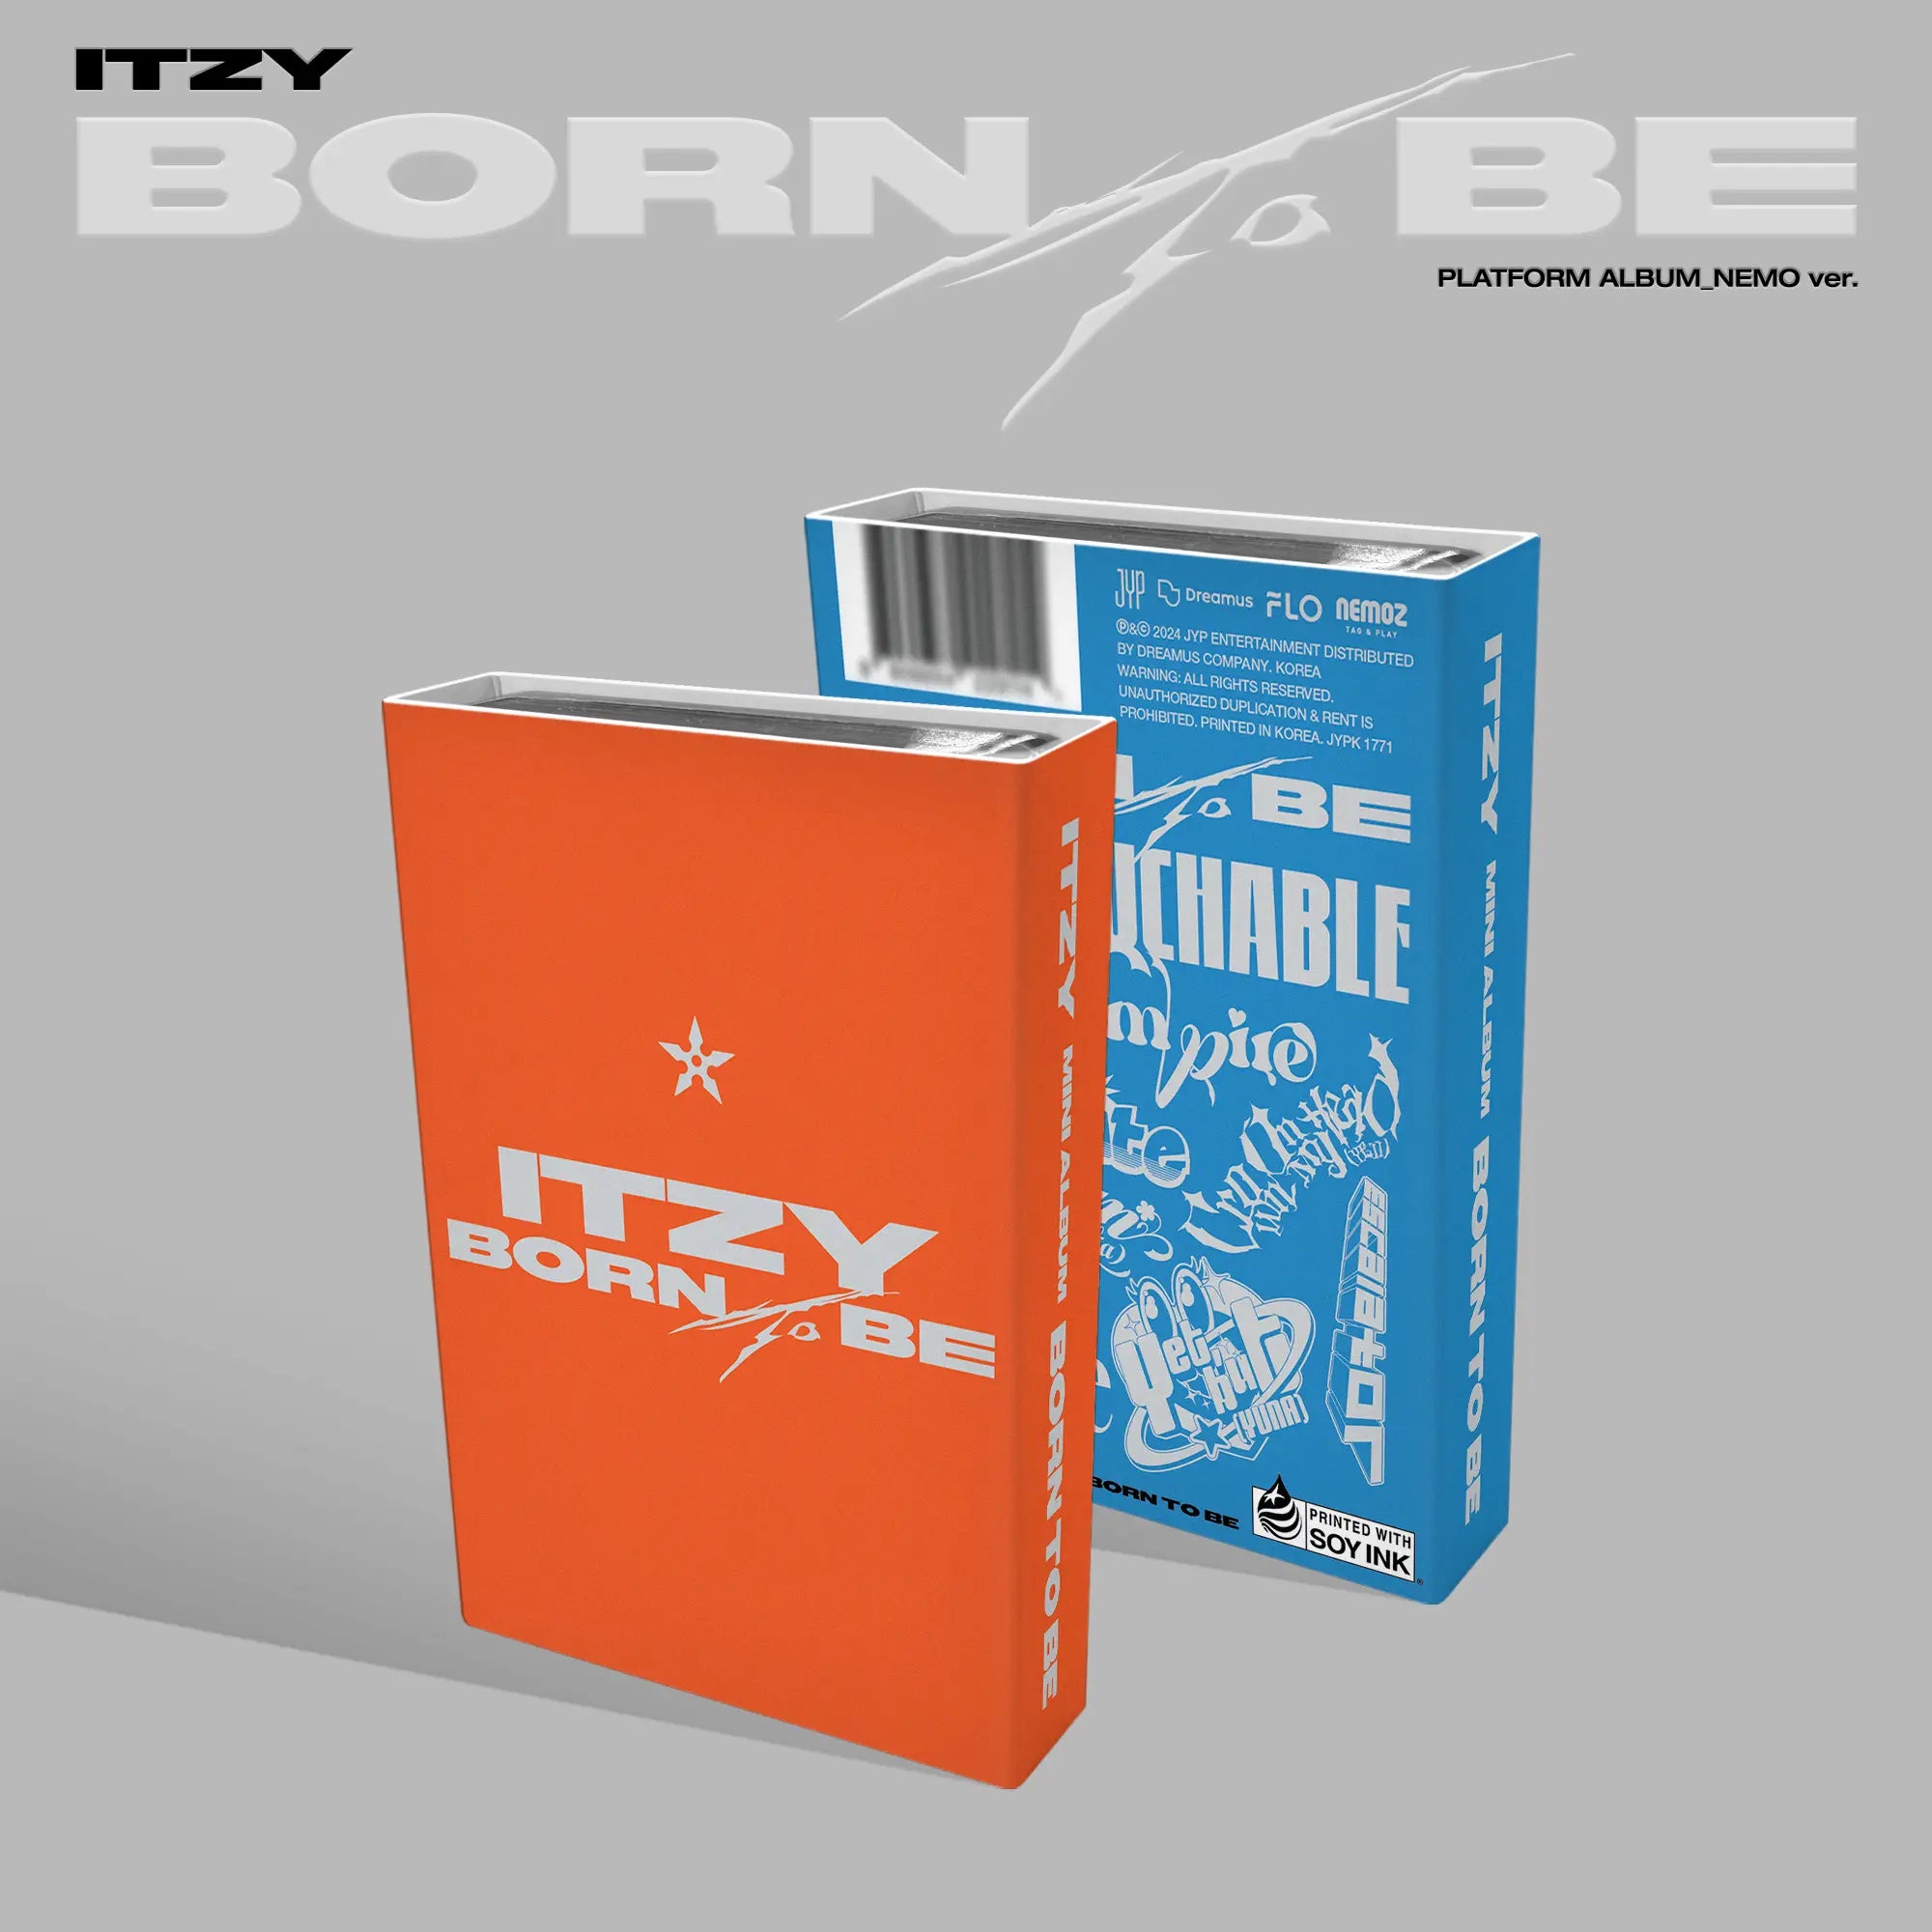 ITZY 'BORN TO BE' CONCEPT PHOTO